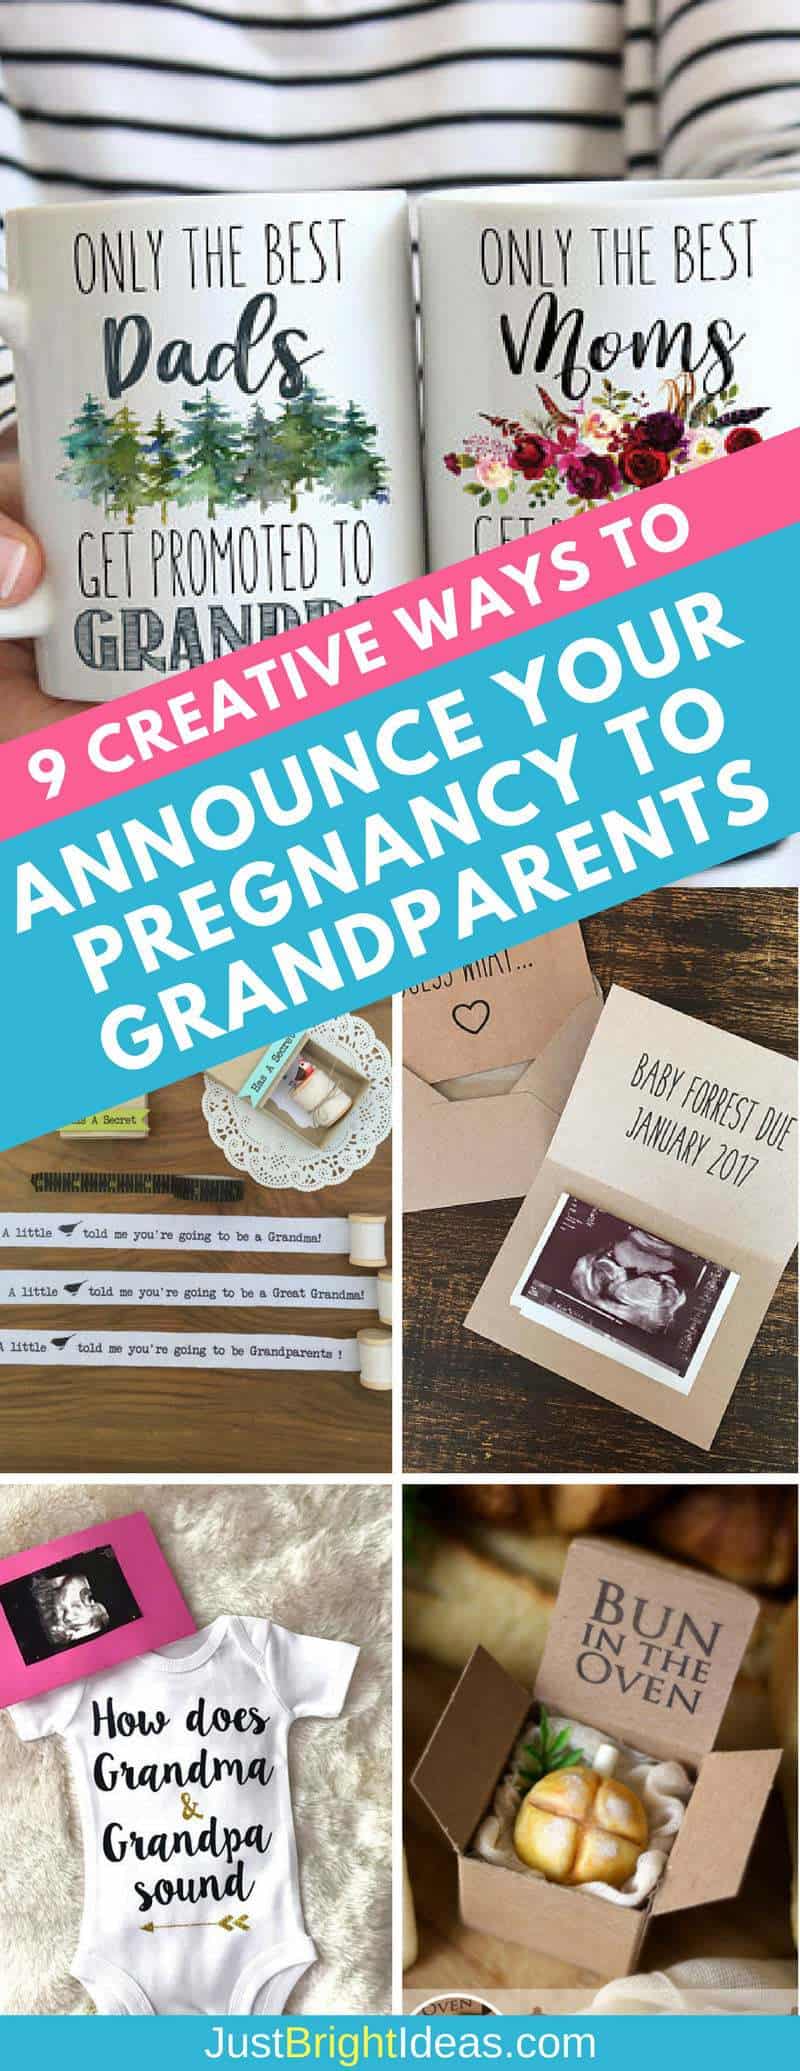 Ways to announce pregnancy to grandparents - Pinterest